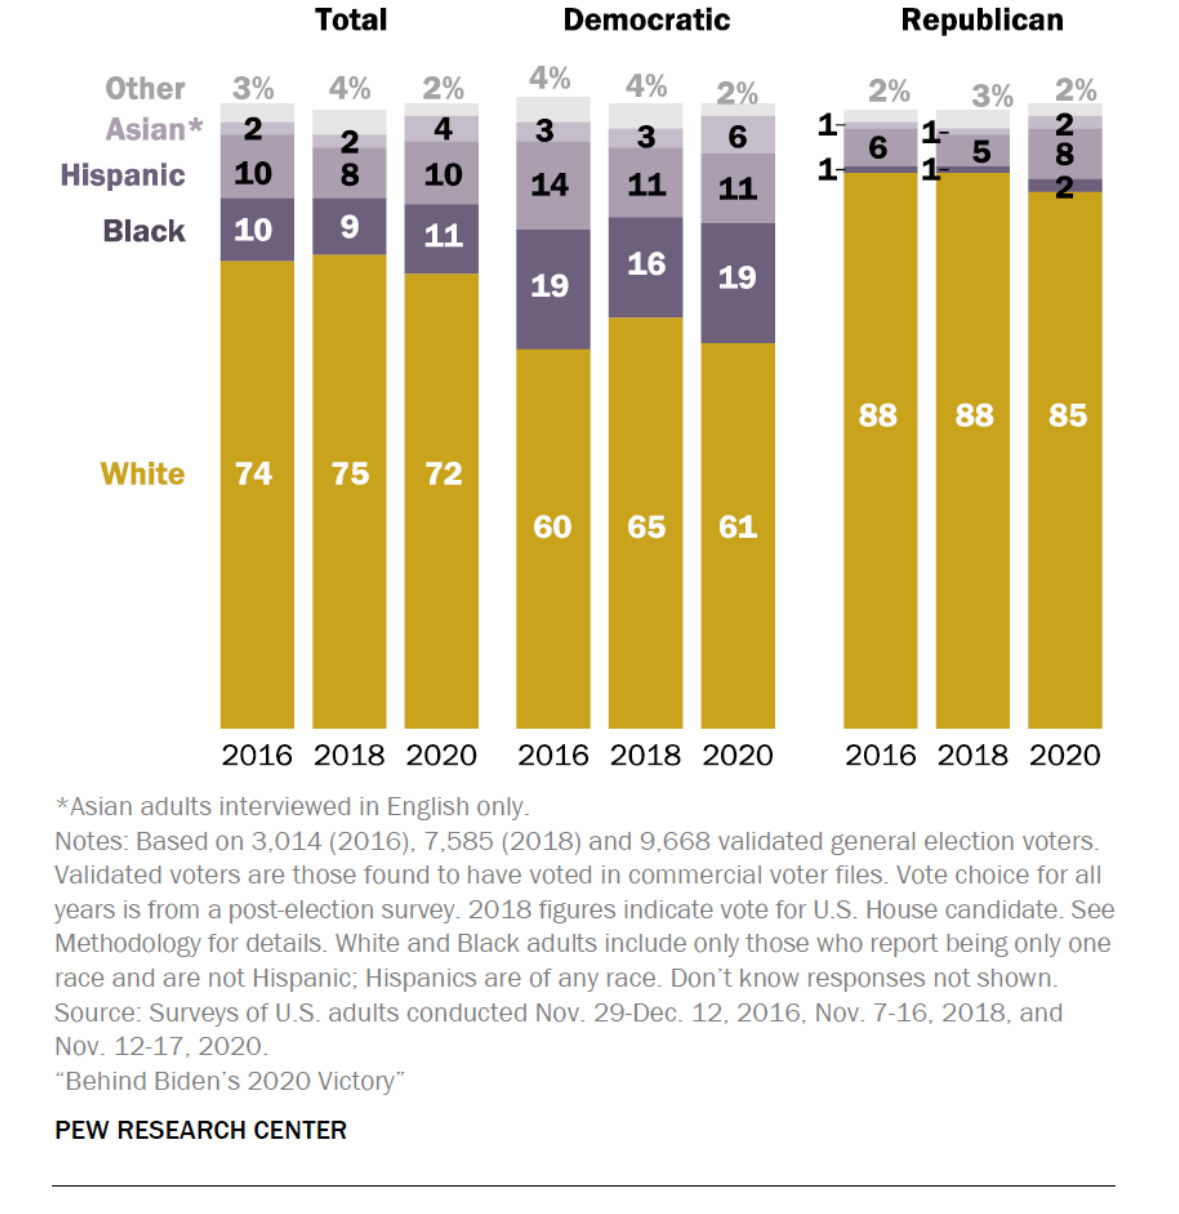 A bar chart from the Pew Research Center showing the racial and ethnic composition of validated voters in the United States for the years 2016, 2018, and 2020, divided into total voters, Democratic voters, and Republican voters.